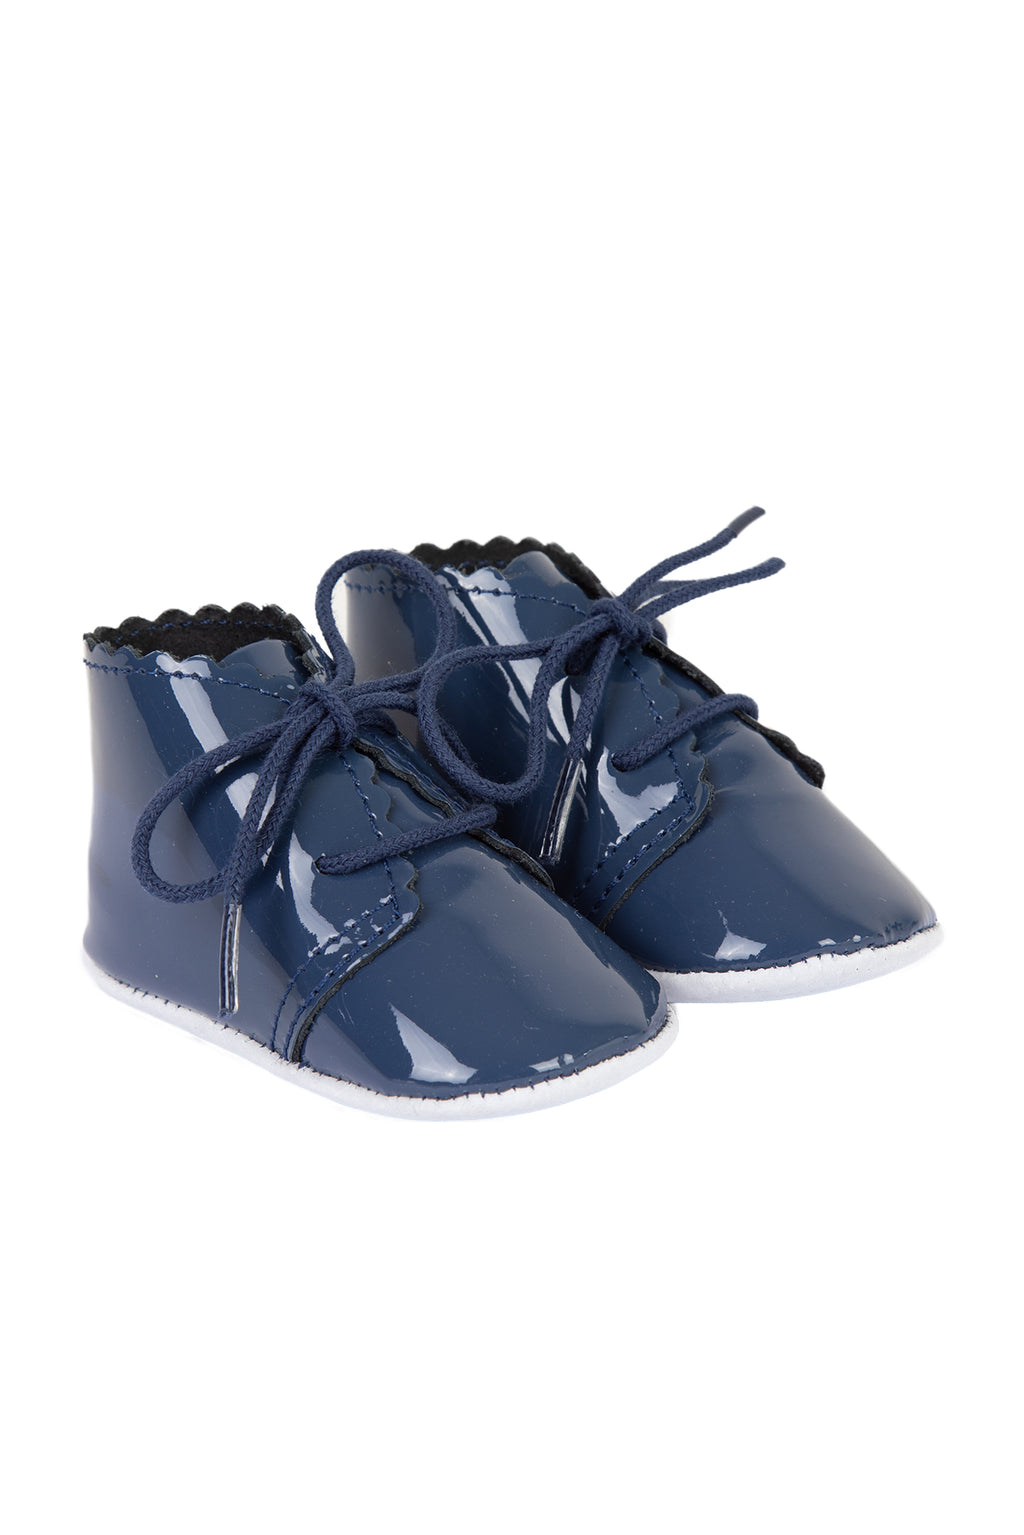 Slippers - Navy patent leather